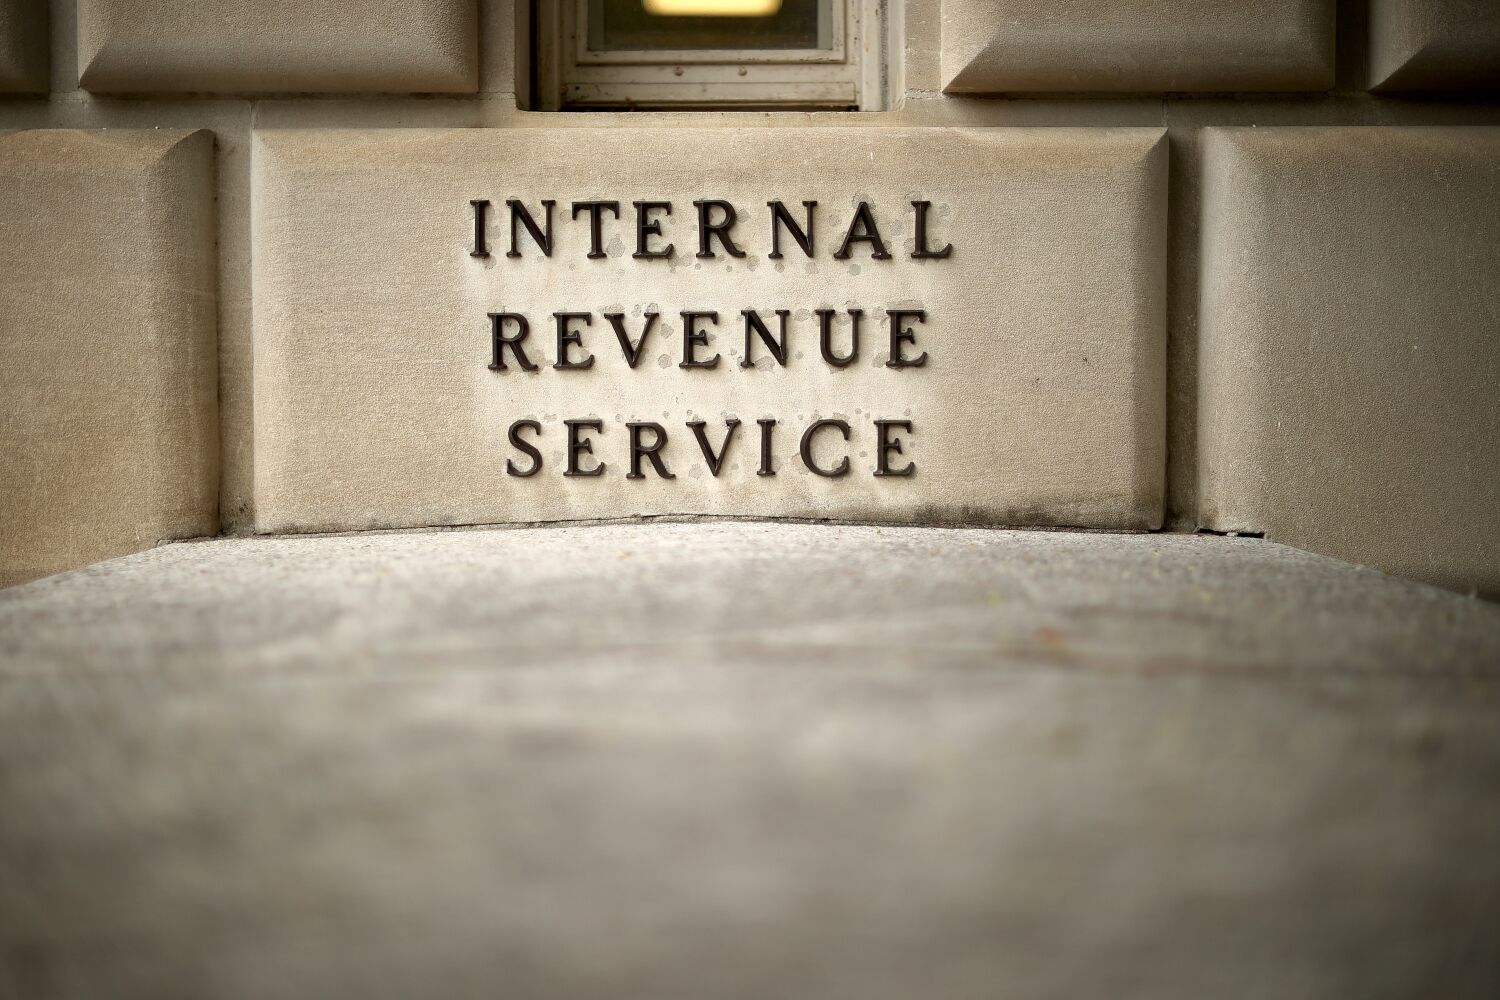 IRS apologizes for “confusion” over tax payment deadlines